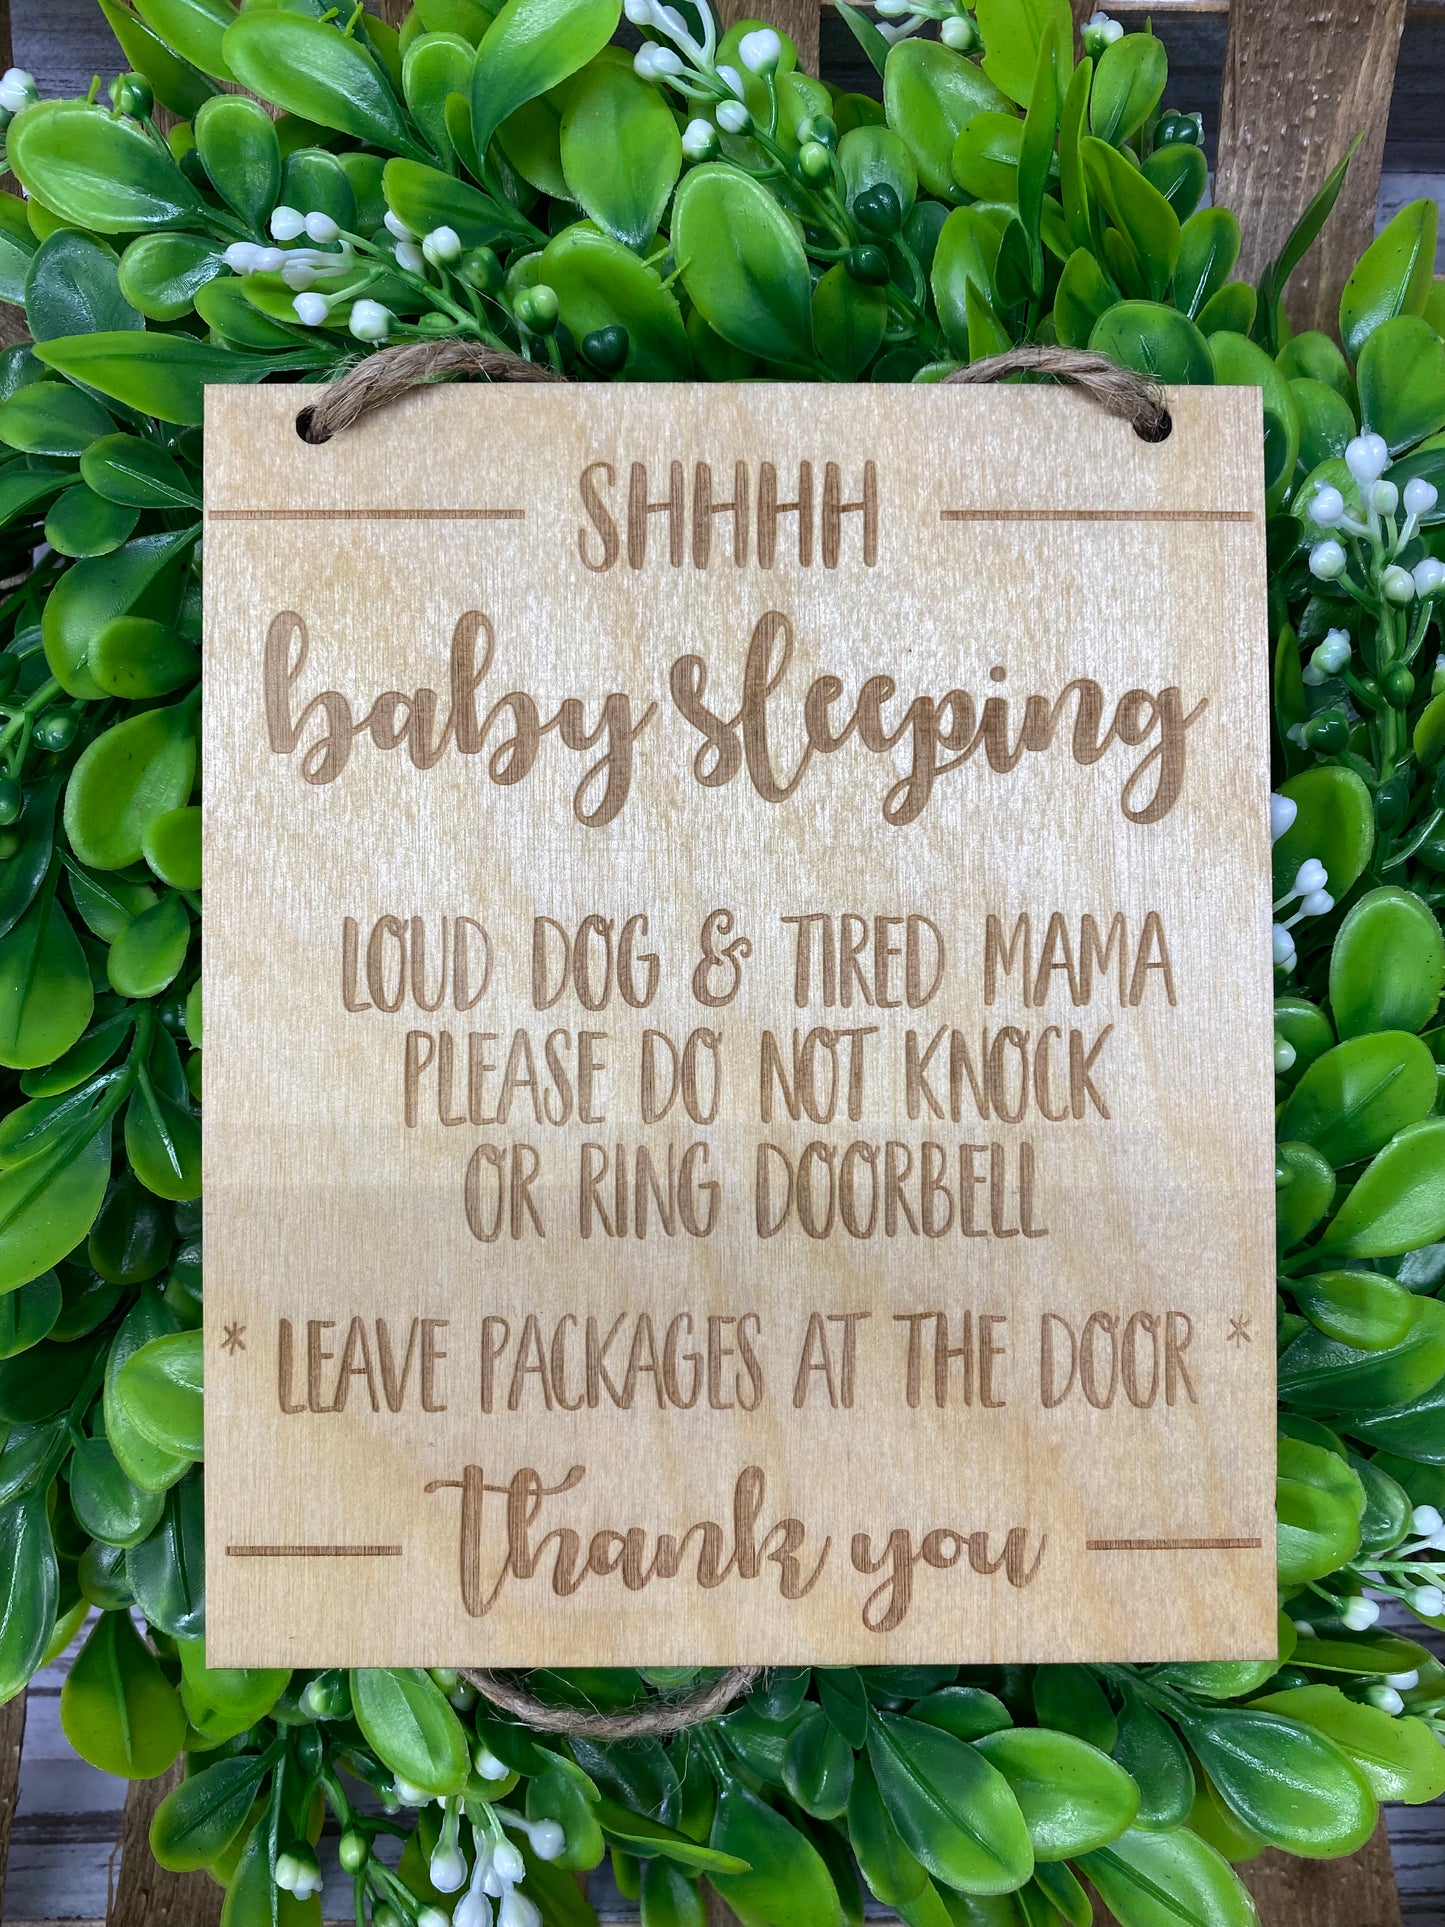 SHHHH Baby Sleeping, Leave Packages at the Door, Don't Ring Doorbell, Baby Sleeping and Loud Dogs